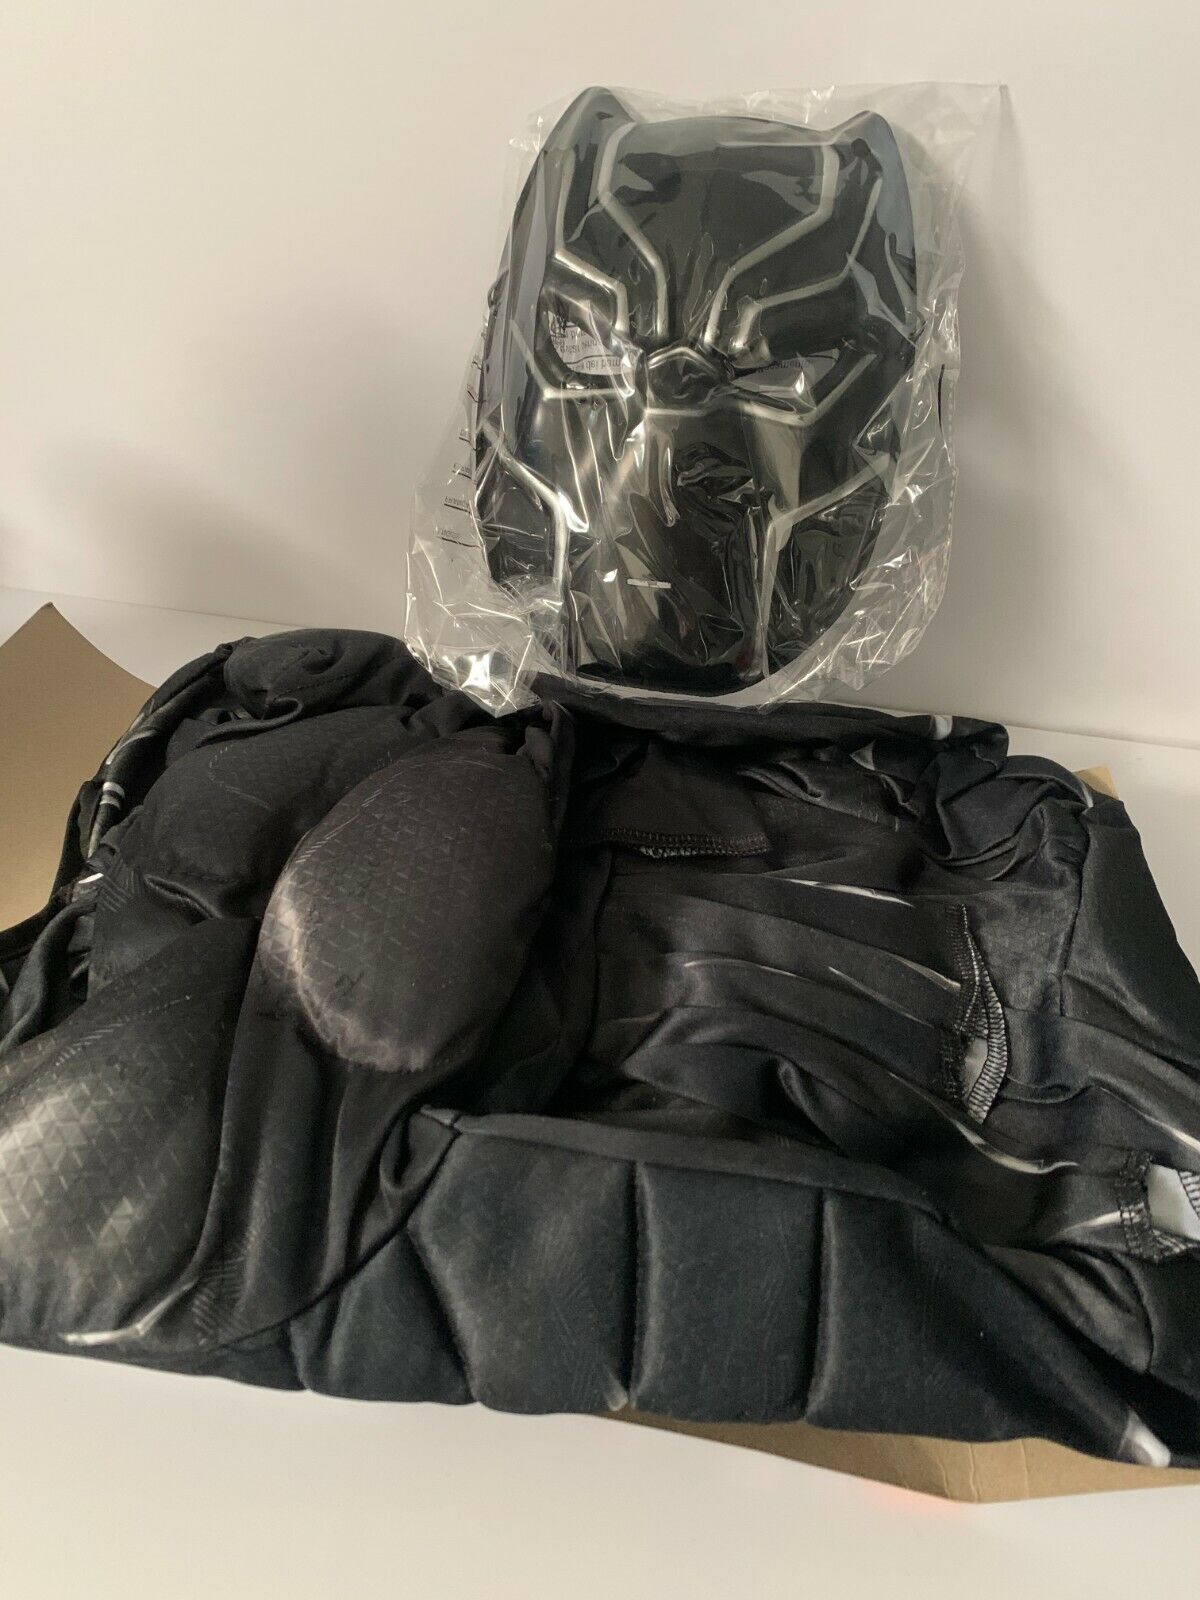 NEW Black Panther Costume Size 4-6 Small & 8-10 Med